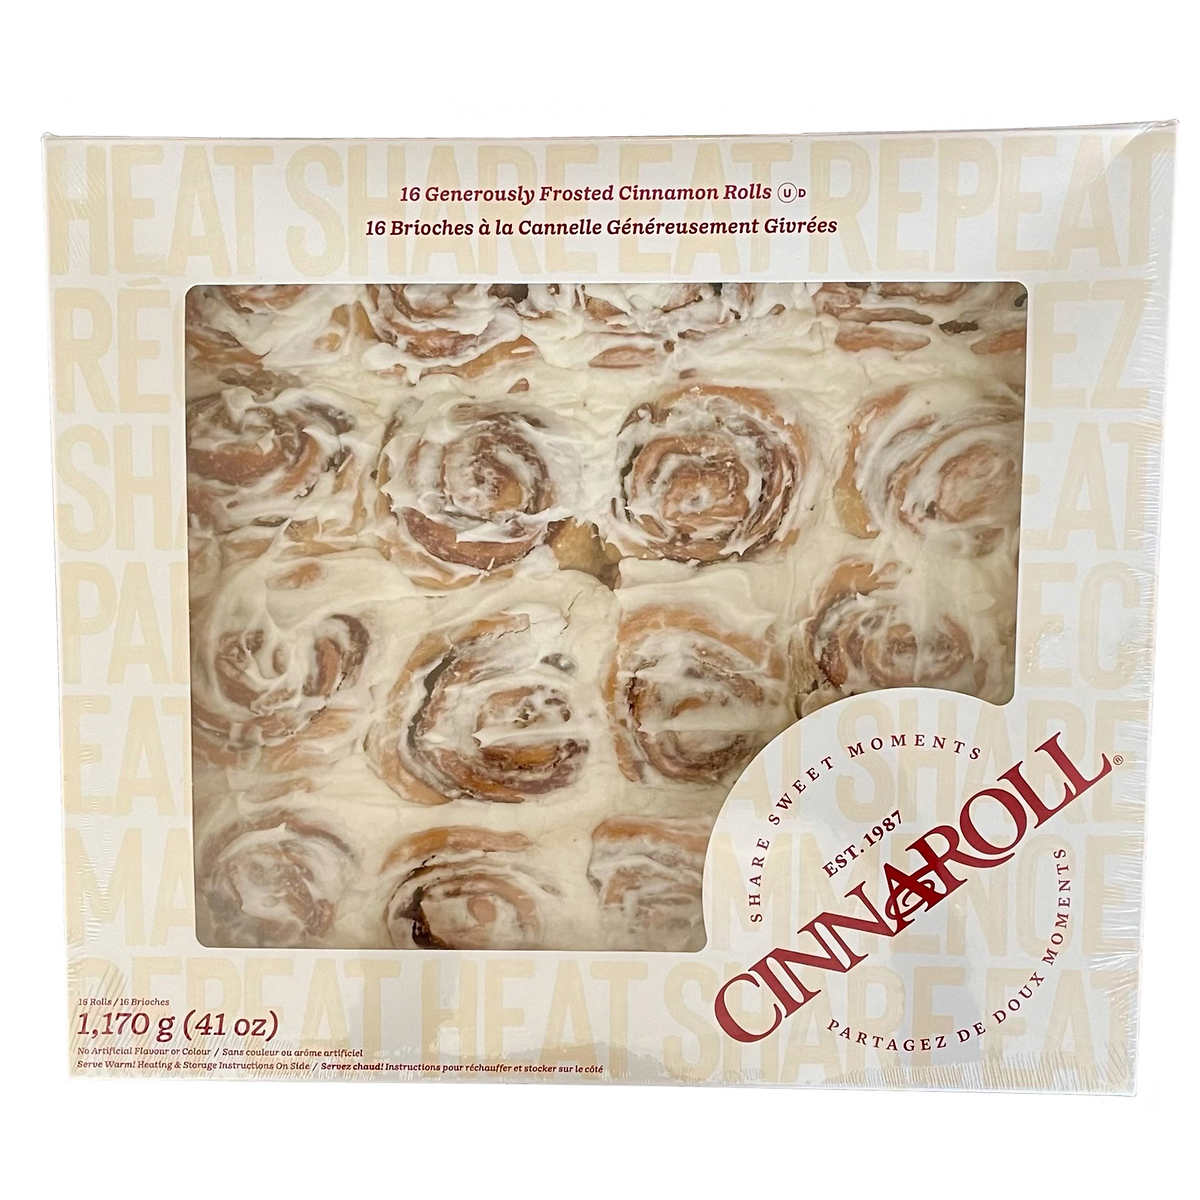 Pack of Costco Cinnaroll Frosted Cinnamon Rolls, 16 pack